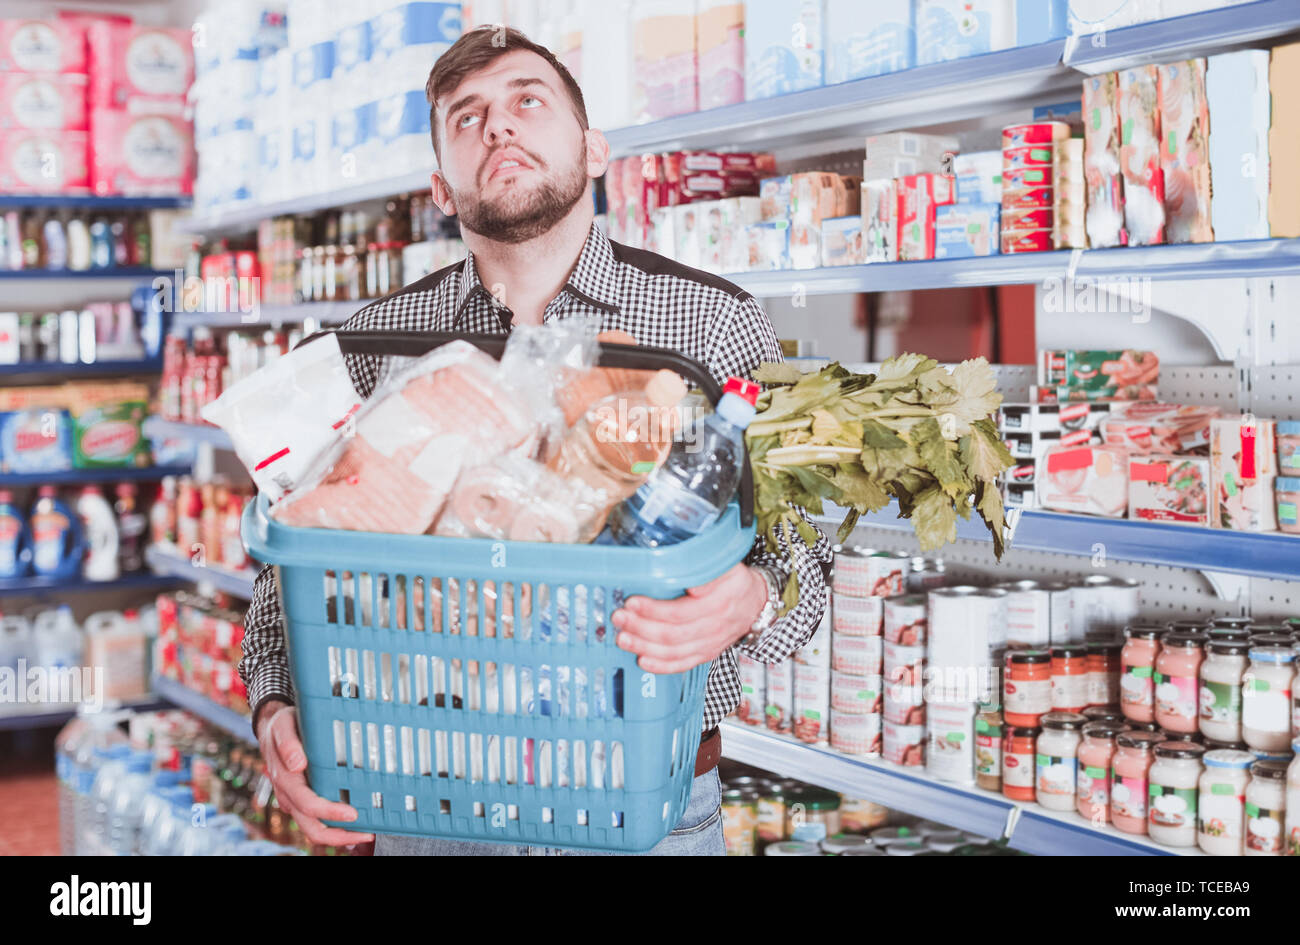 Tired young male with heavy shopping basket filled food products in supermarket Stock Photo